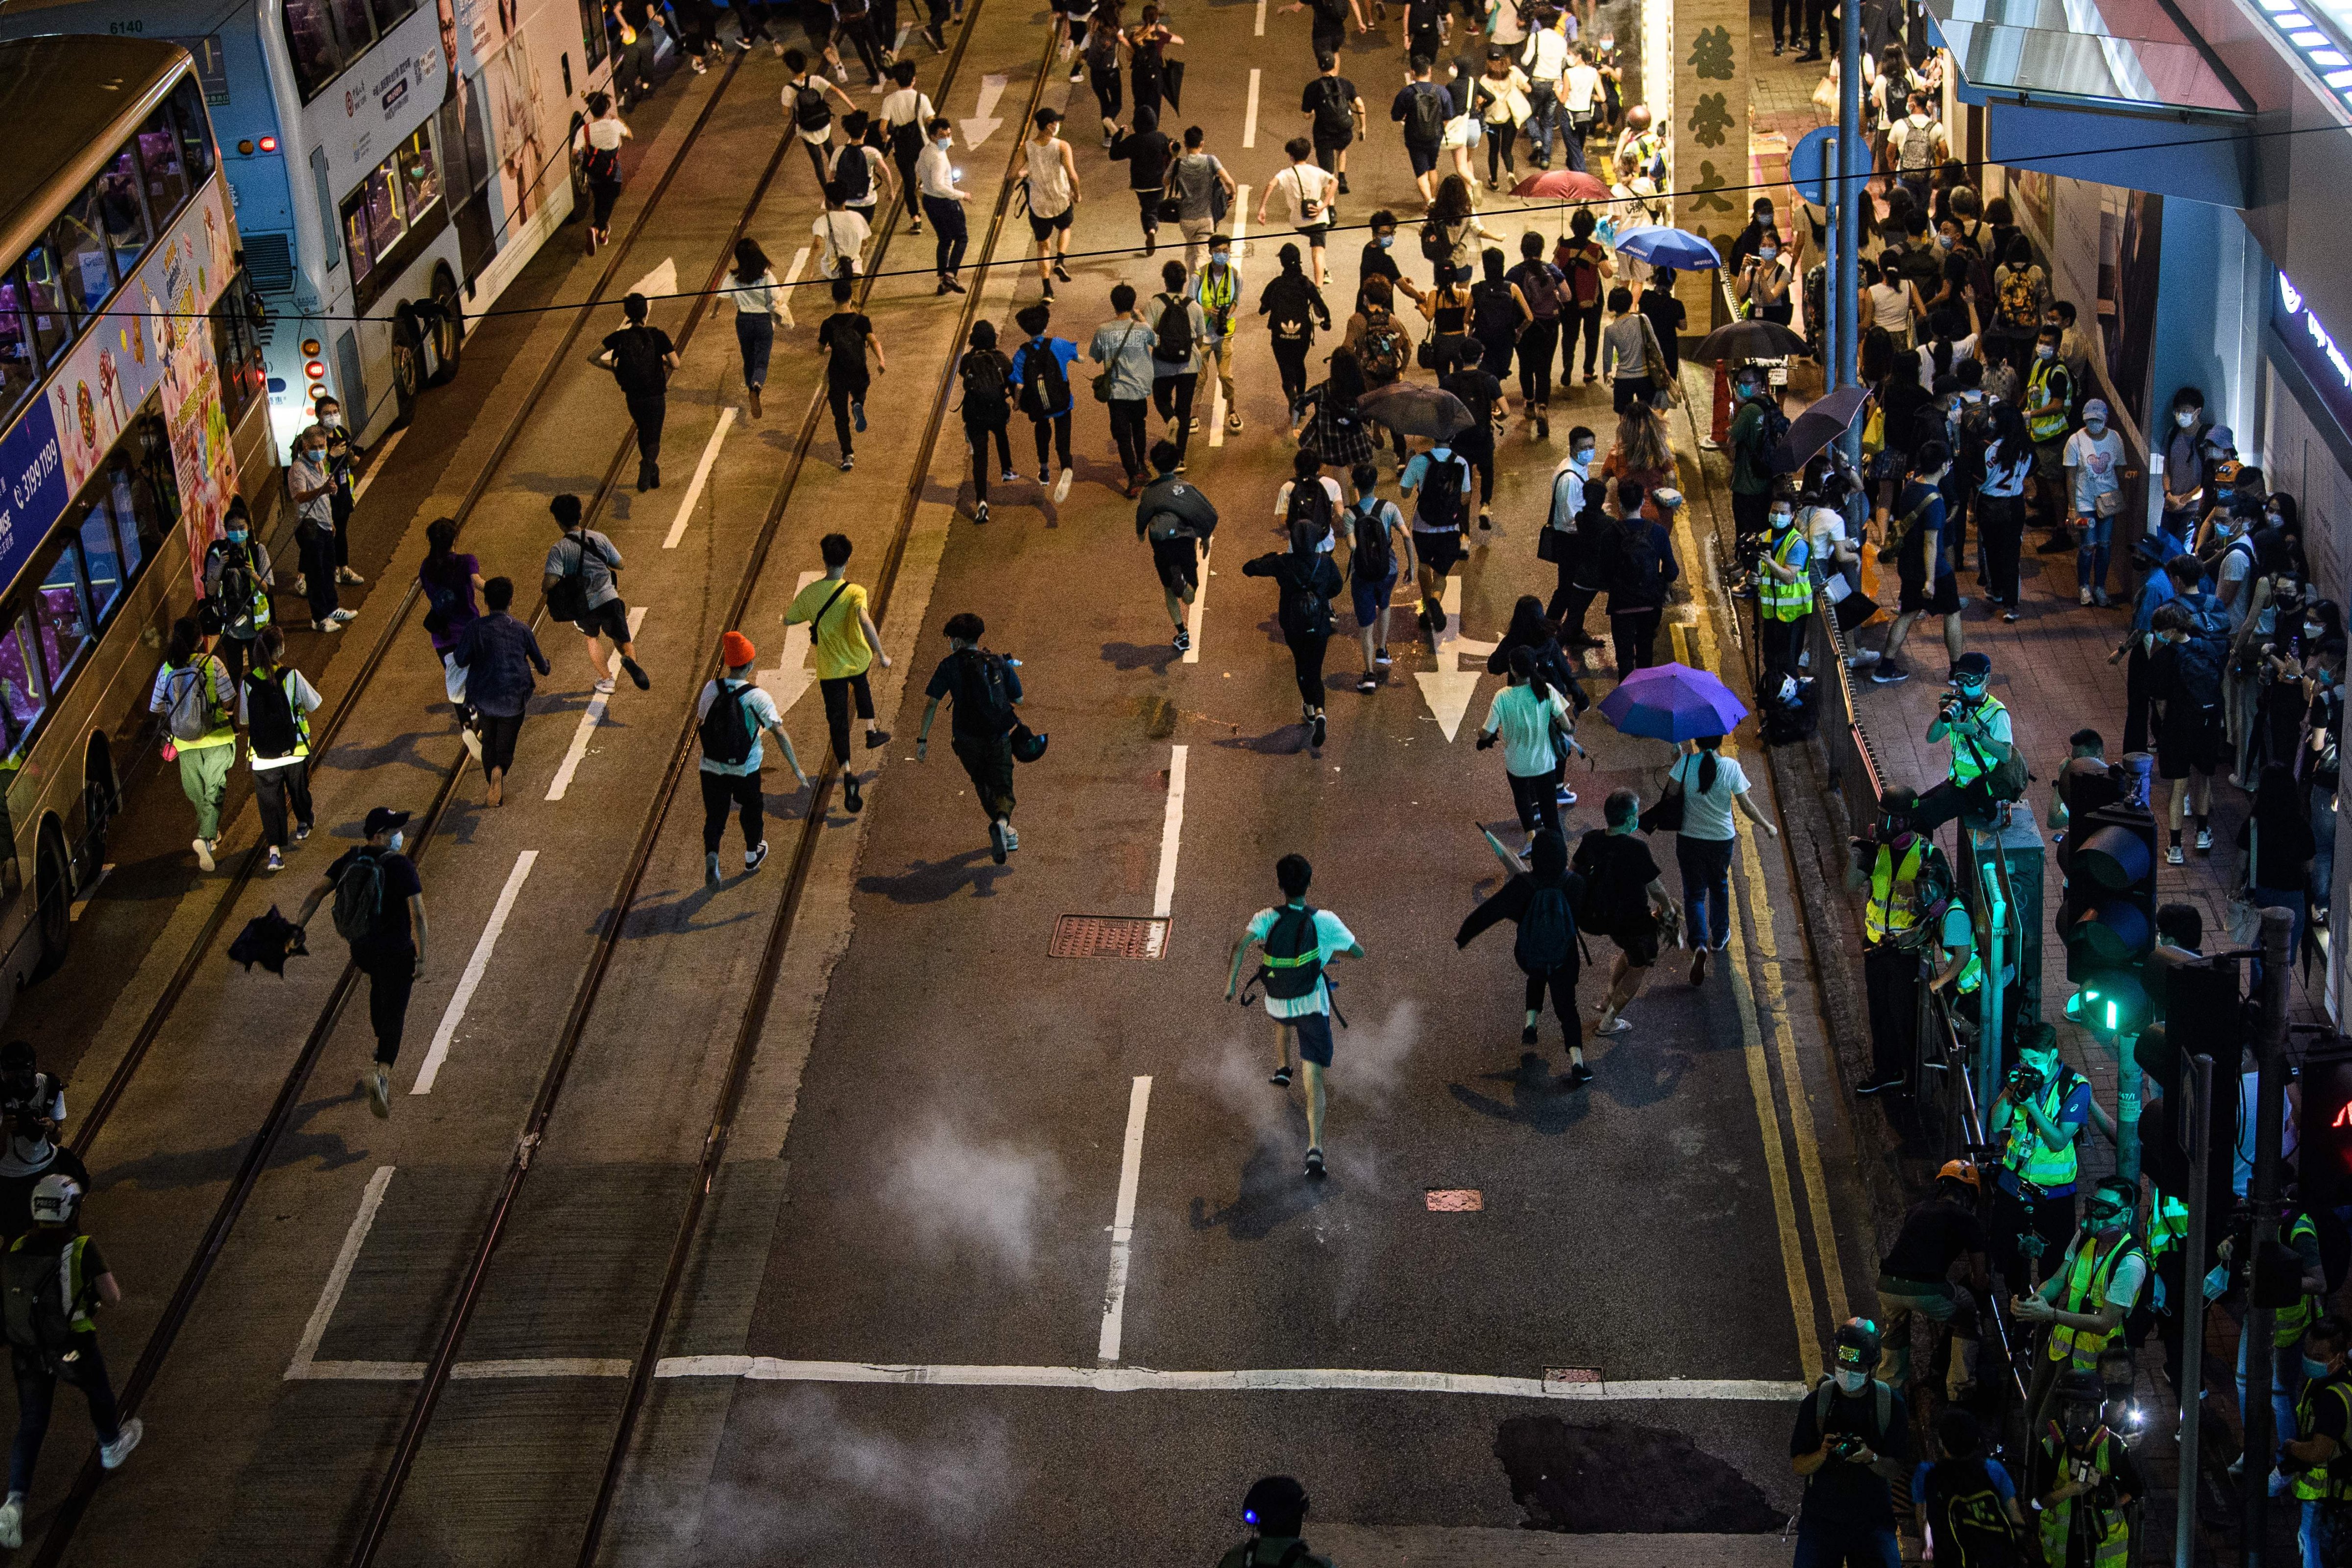 Pro-democracy protesters run as police fire pepper ball rounds to disperse the crowd in the Central district of Hong Kong on June 9, 2020, as the city marks the one-year anniversary since pro-democracy protests erupted (ANTHONY WALLACE/AFP via Getty Images)